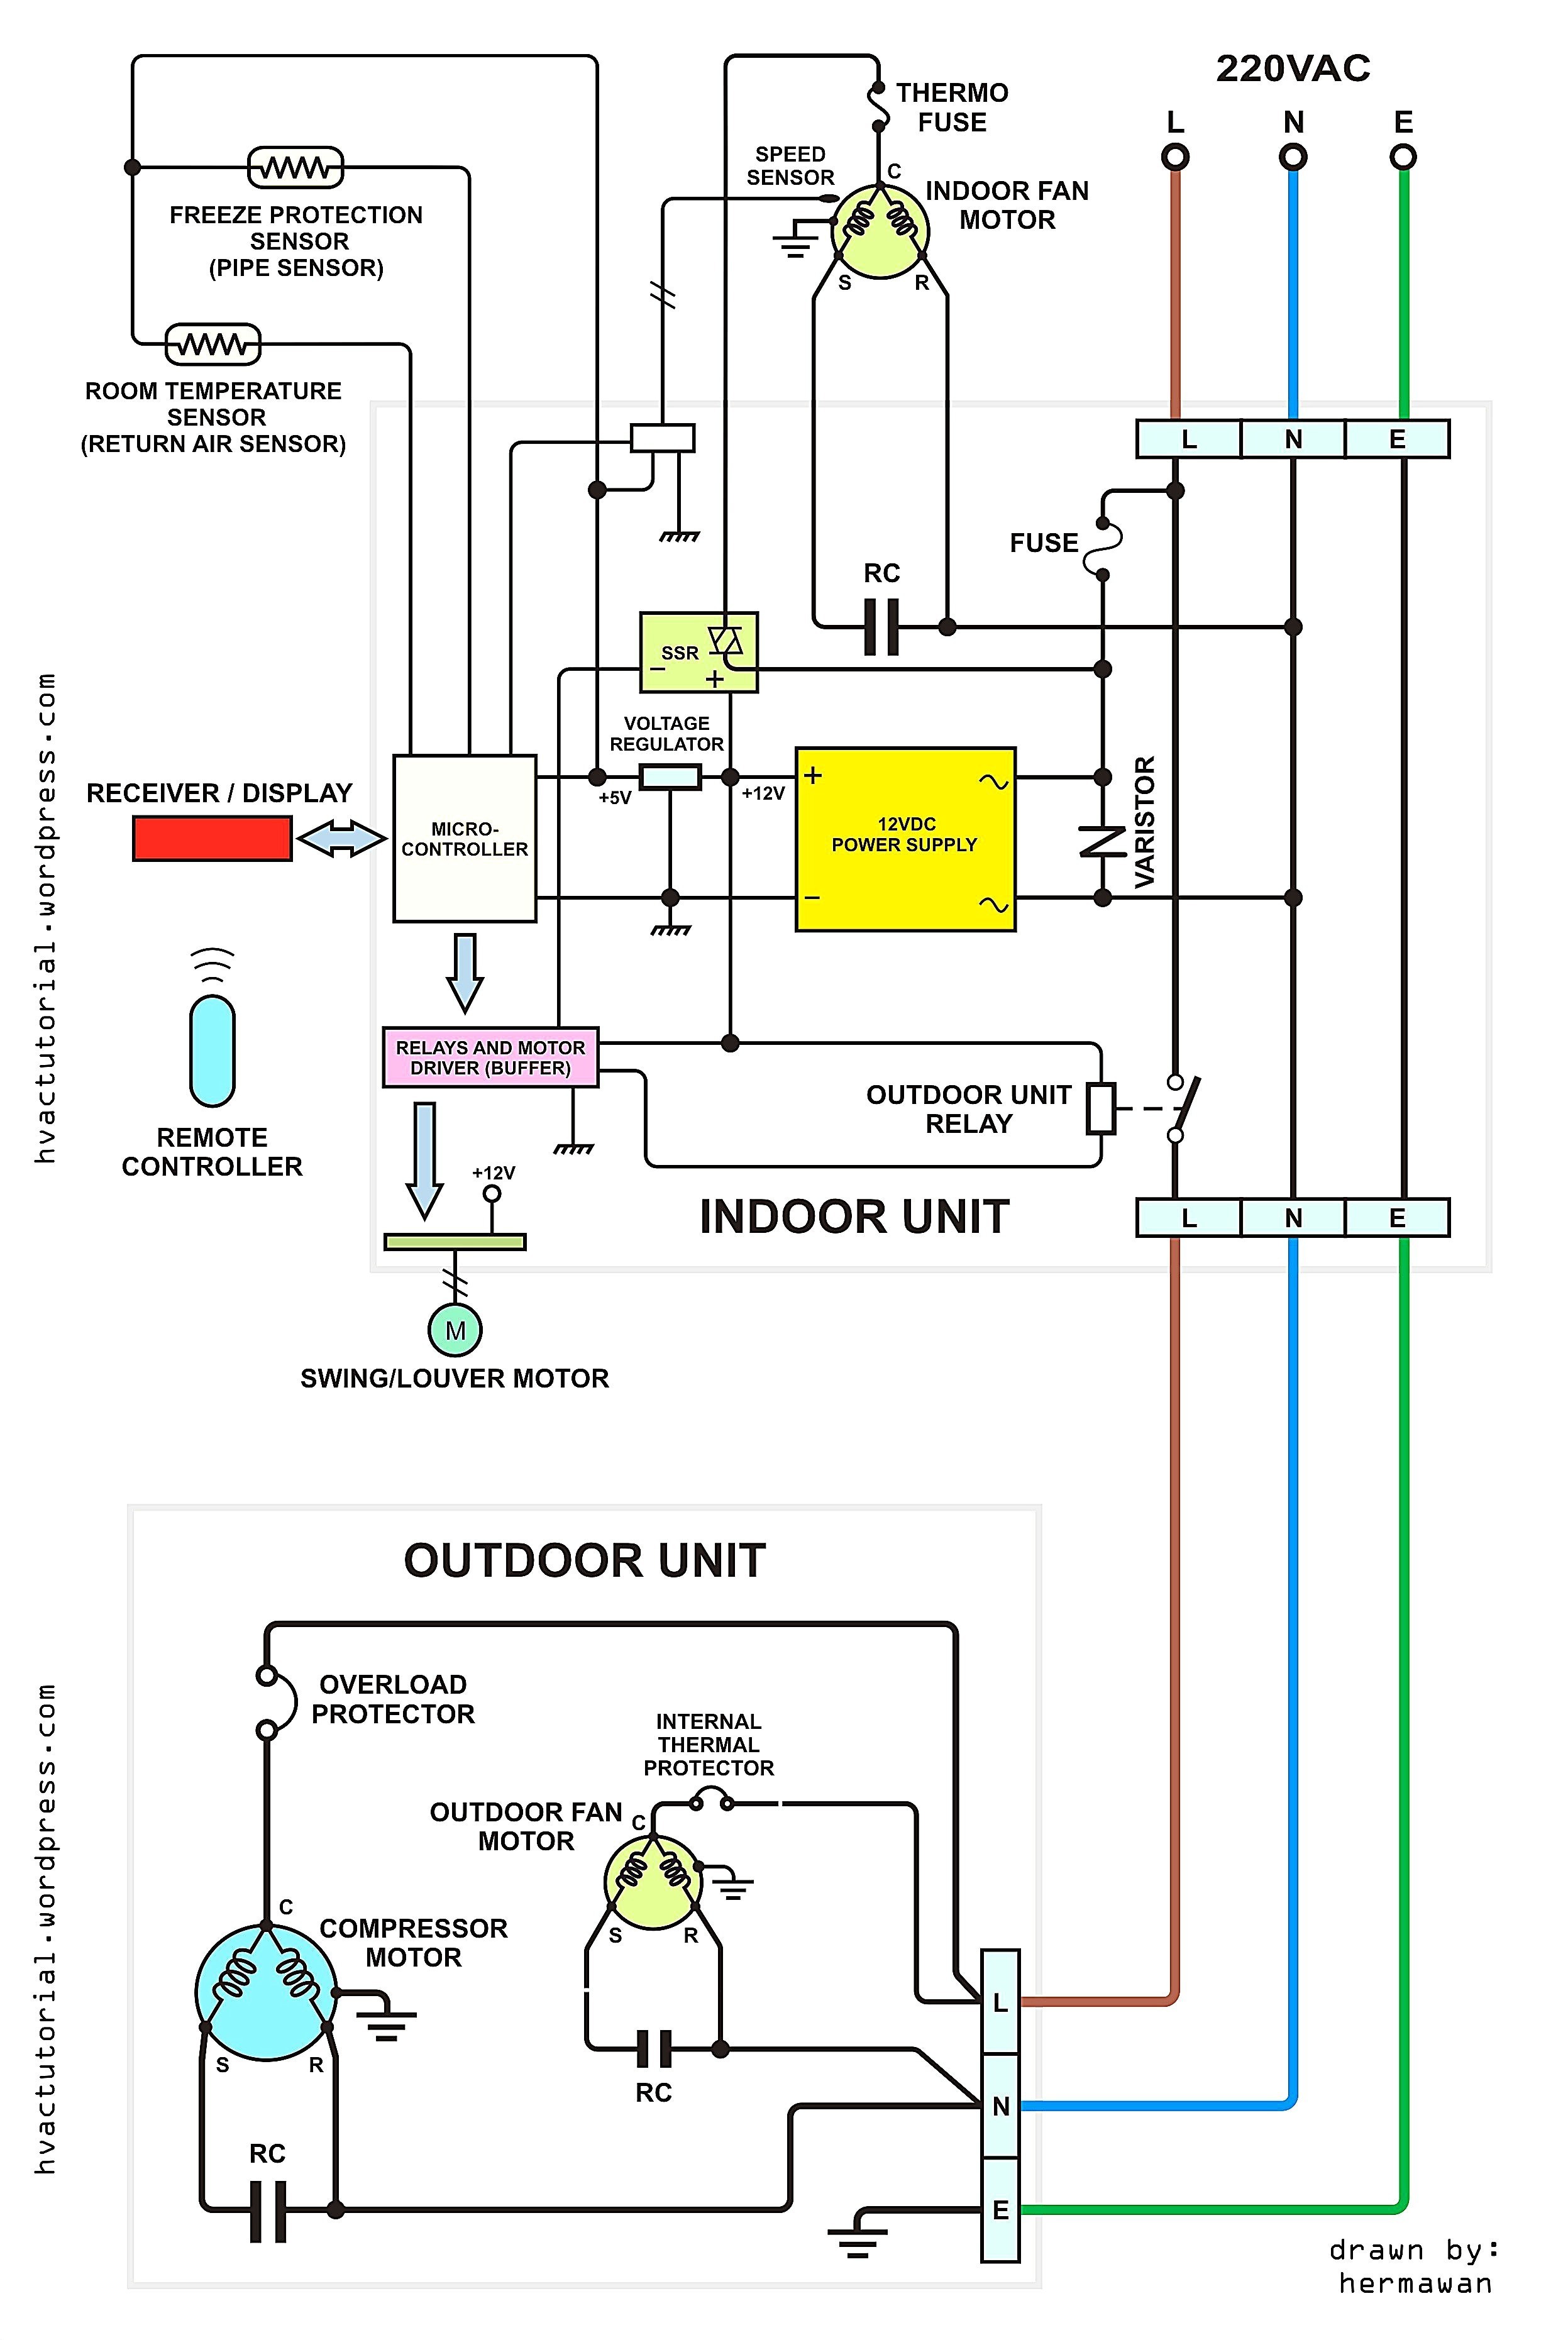 Duo therm Rv Air Conditioner Wiring Diagram Fresh Duo therm thermostat Wiring Diagram Diagram Of Duo therm Rv Air Conditioner Wiring Diagram